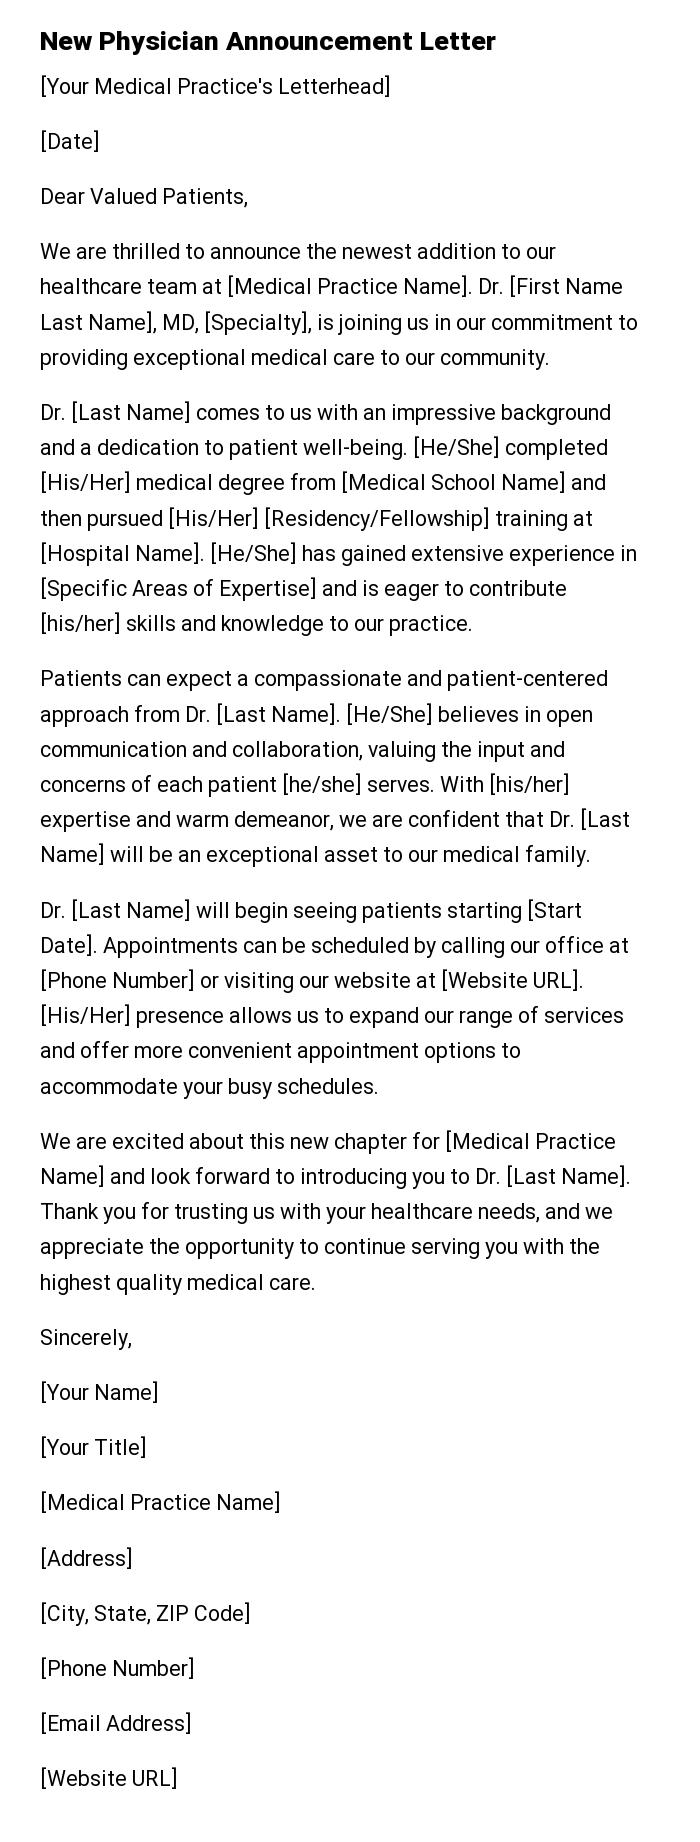 New Physician Announcement Letter